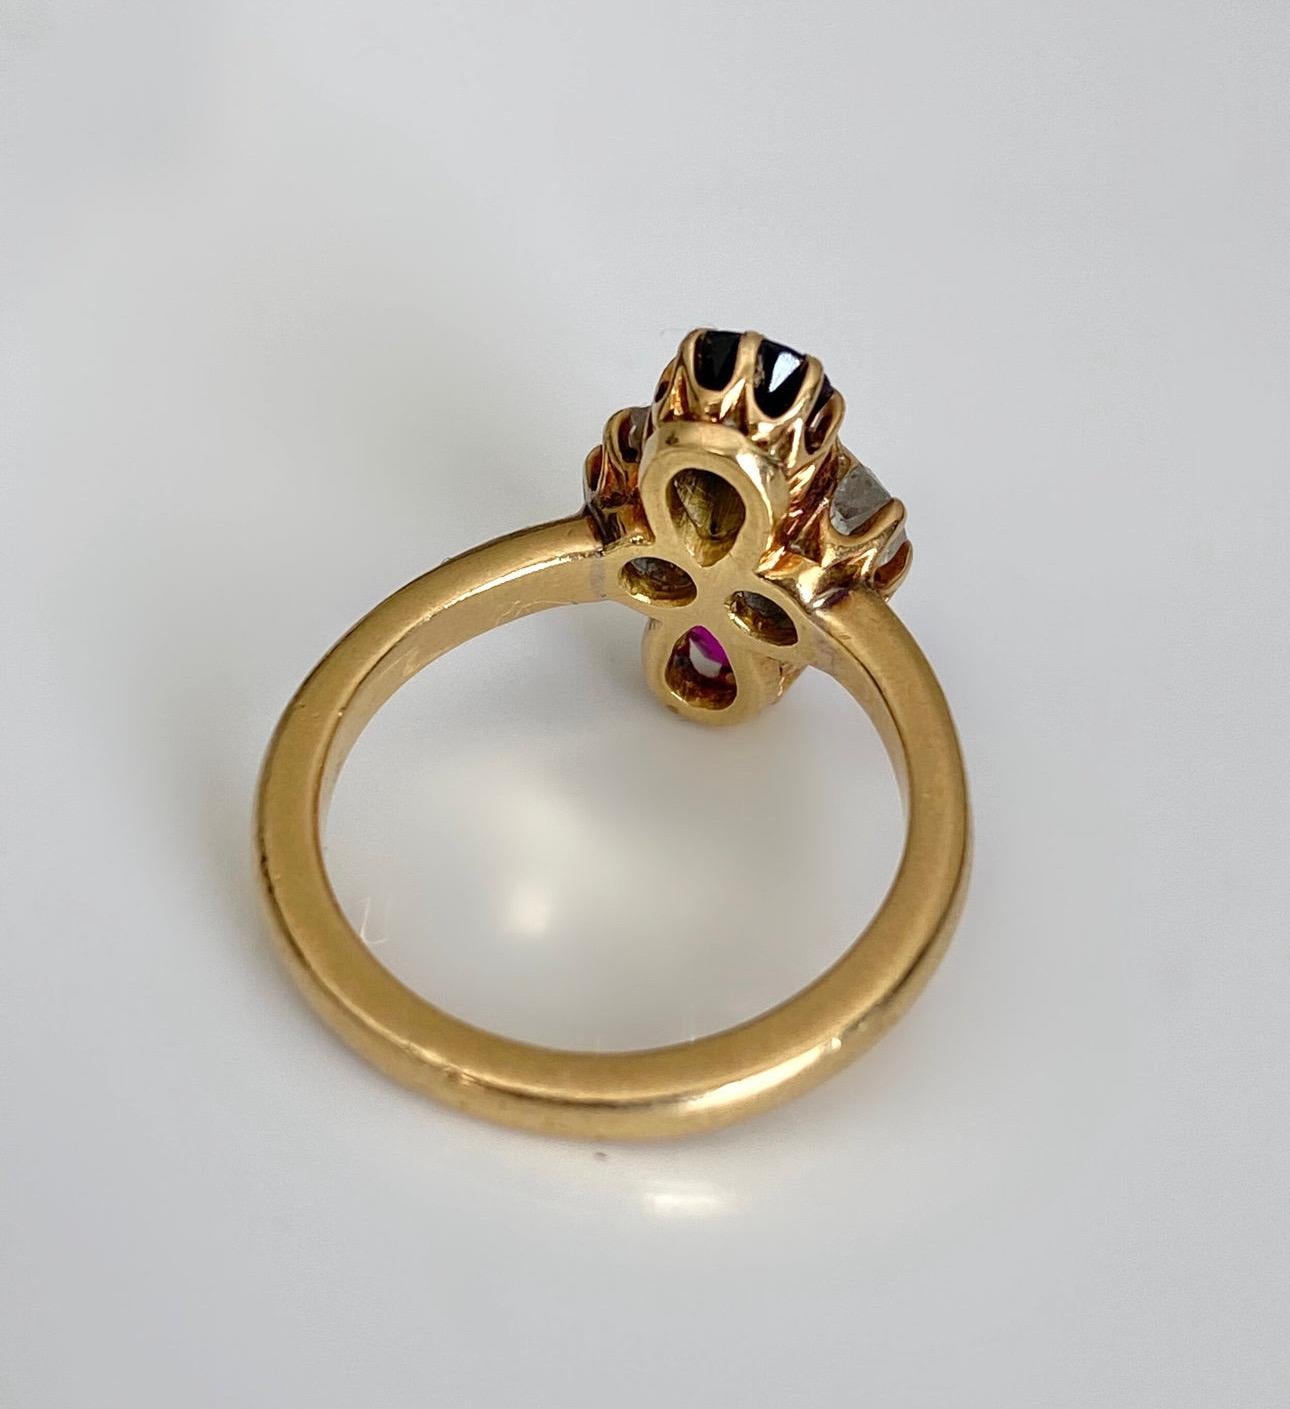 Edwardian 18K Sapphire, Diamond and Burmese Ruby Quatrefoil Ring - AGL In Good Condition For Sale In Hummelstown, PA